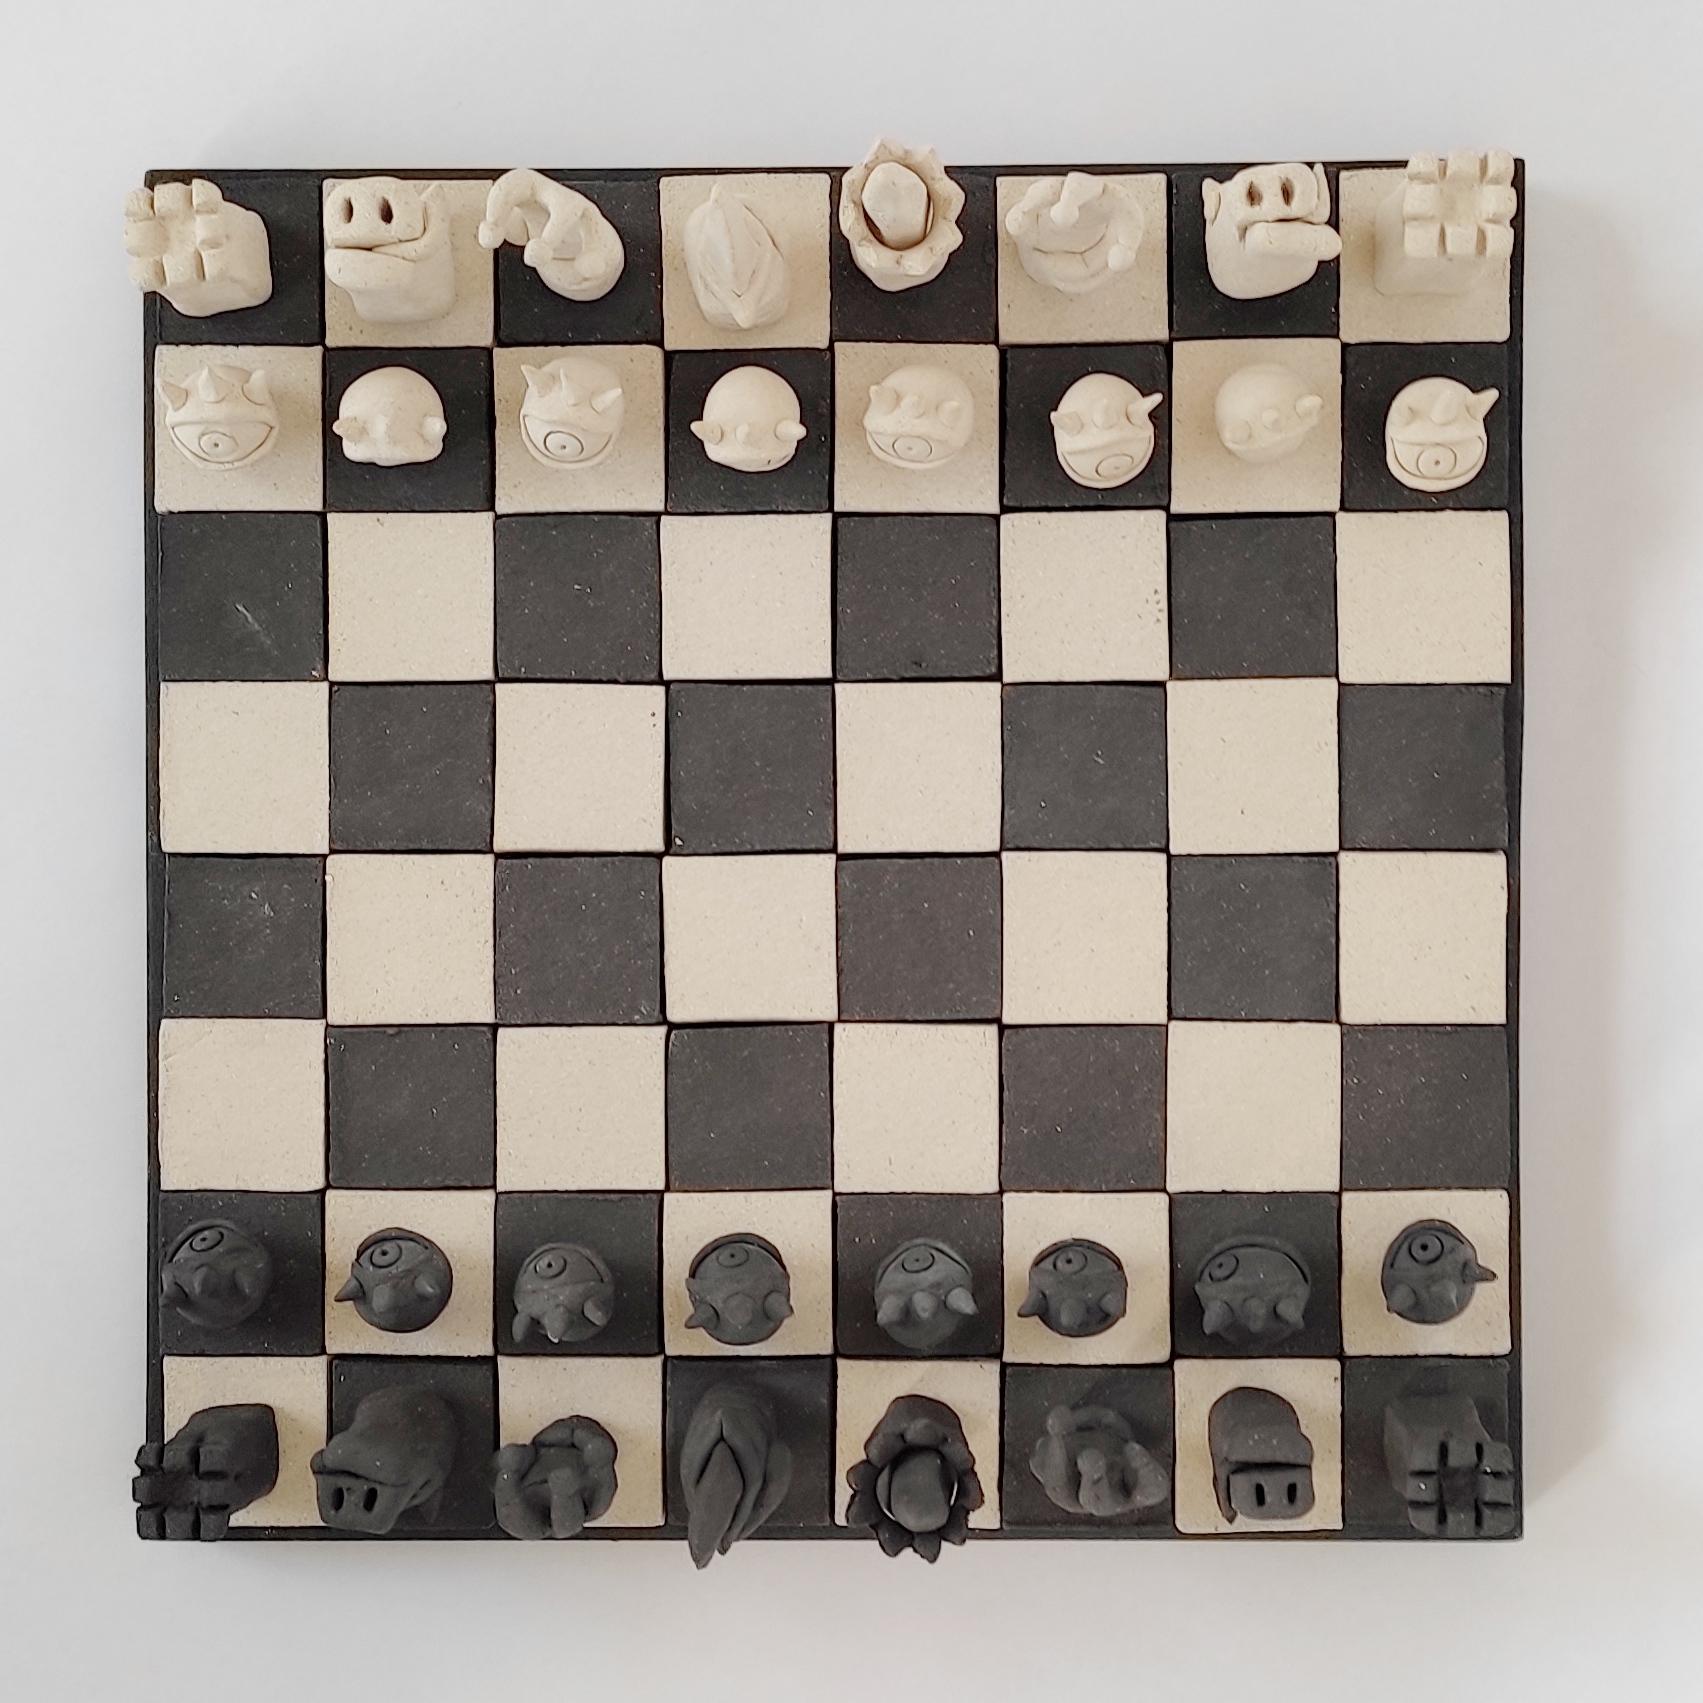 Basile Boon deconstructs dogmas and legends that surround him to create his own pop and lyrical odyssey. The artists invites the viewer to project his own story. 

This chessboard is a world that brings together miniatures of Basile Boon's